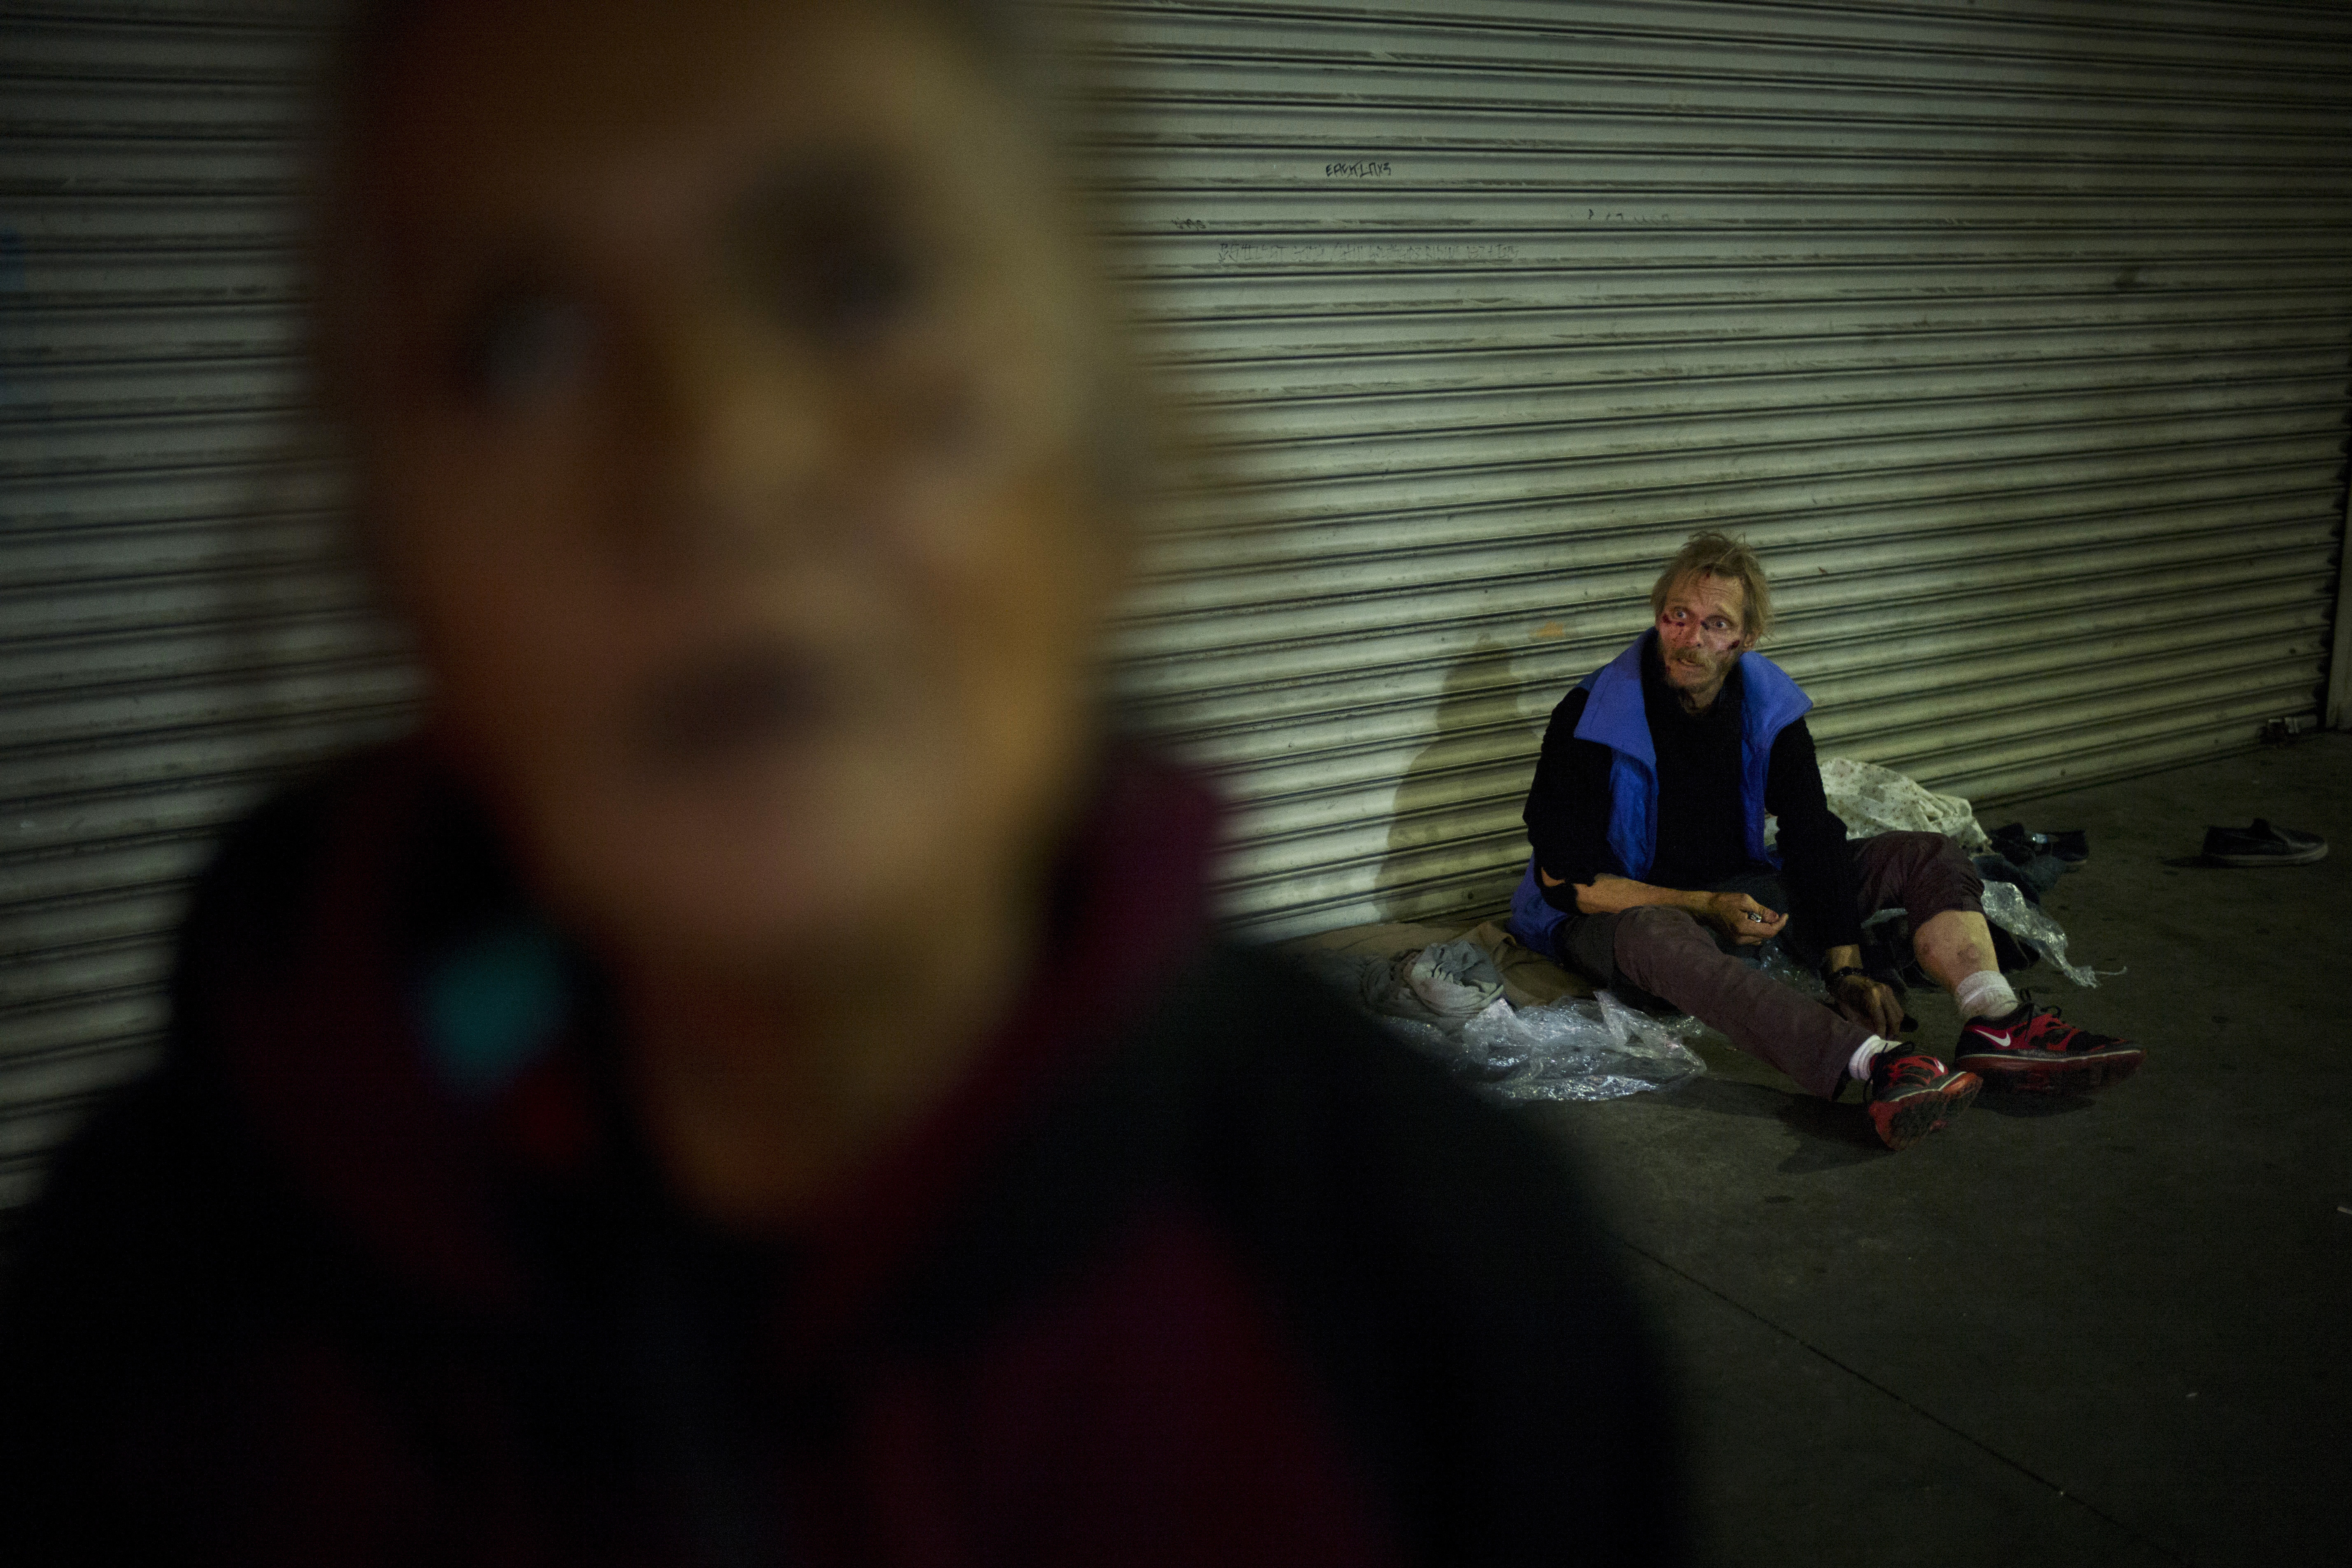 Eyes Of The Homeless Reveal Stories Of Heartache Hope NBC Boston